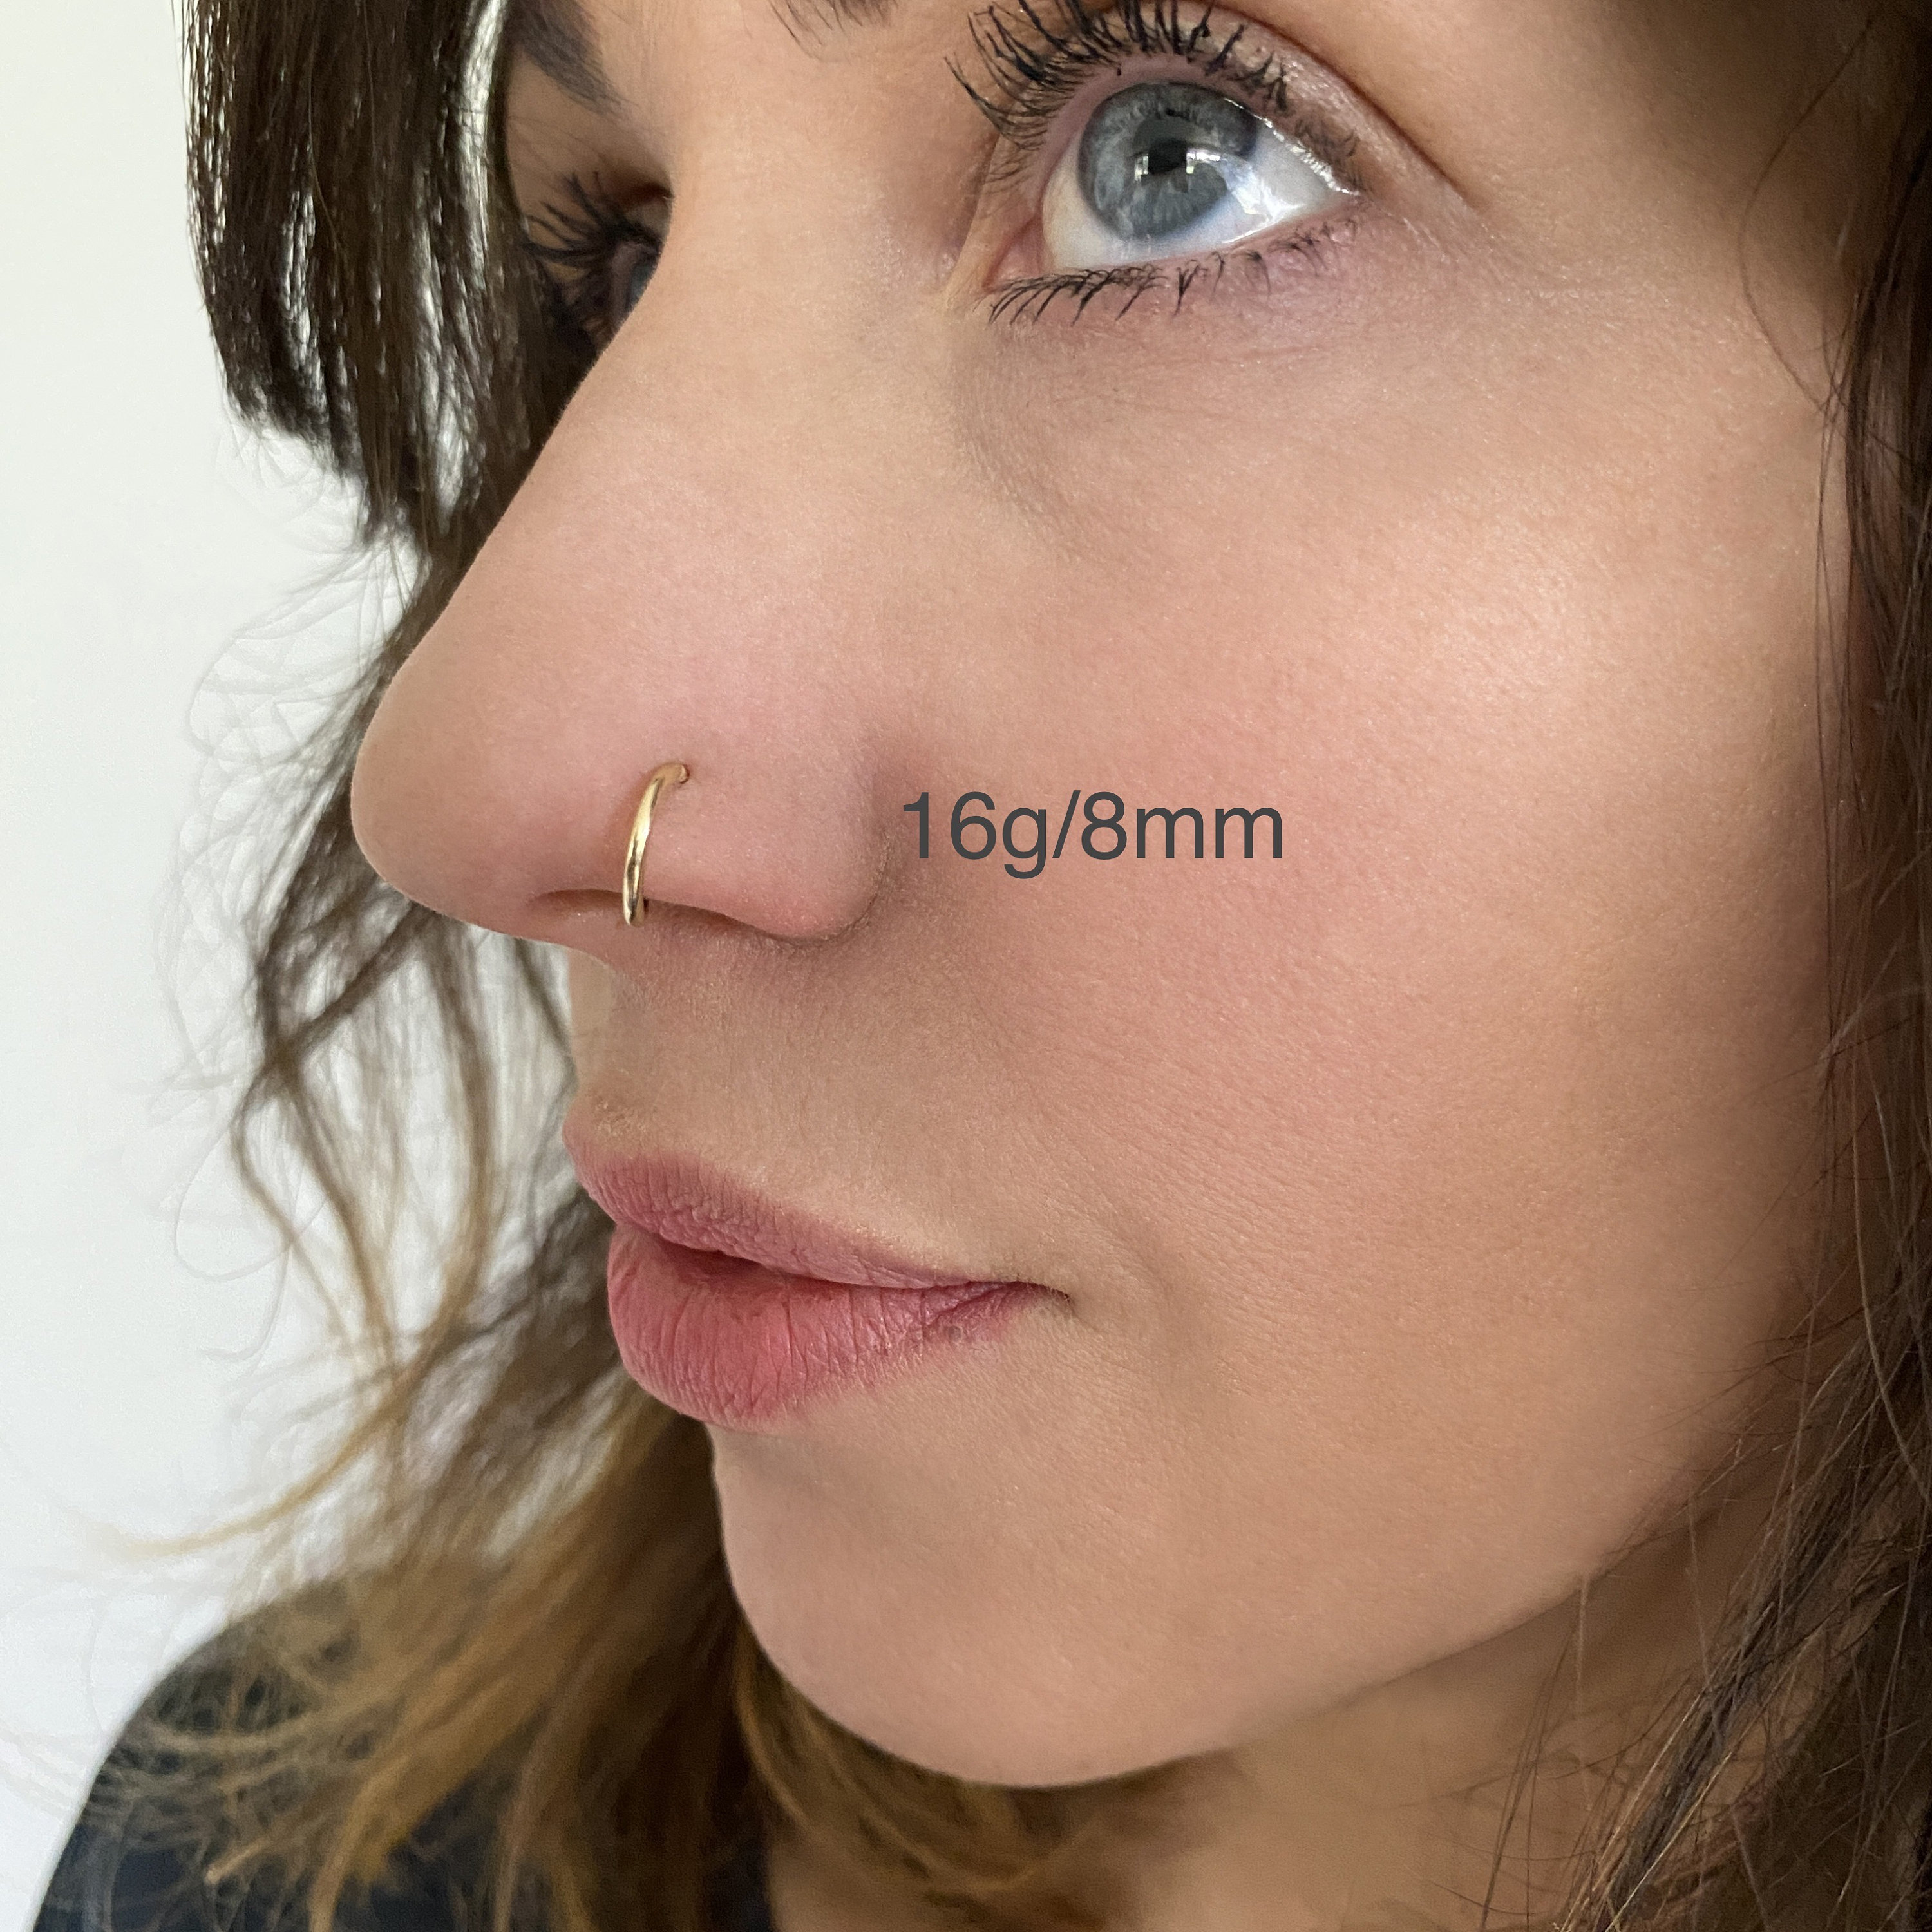 Tiny Silver Nose Ring - Hoop Nose Ring - 6mm